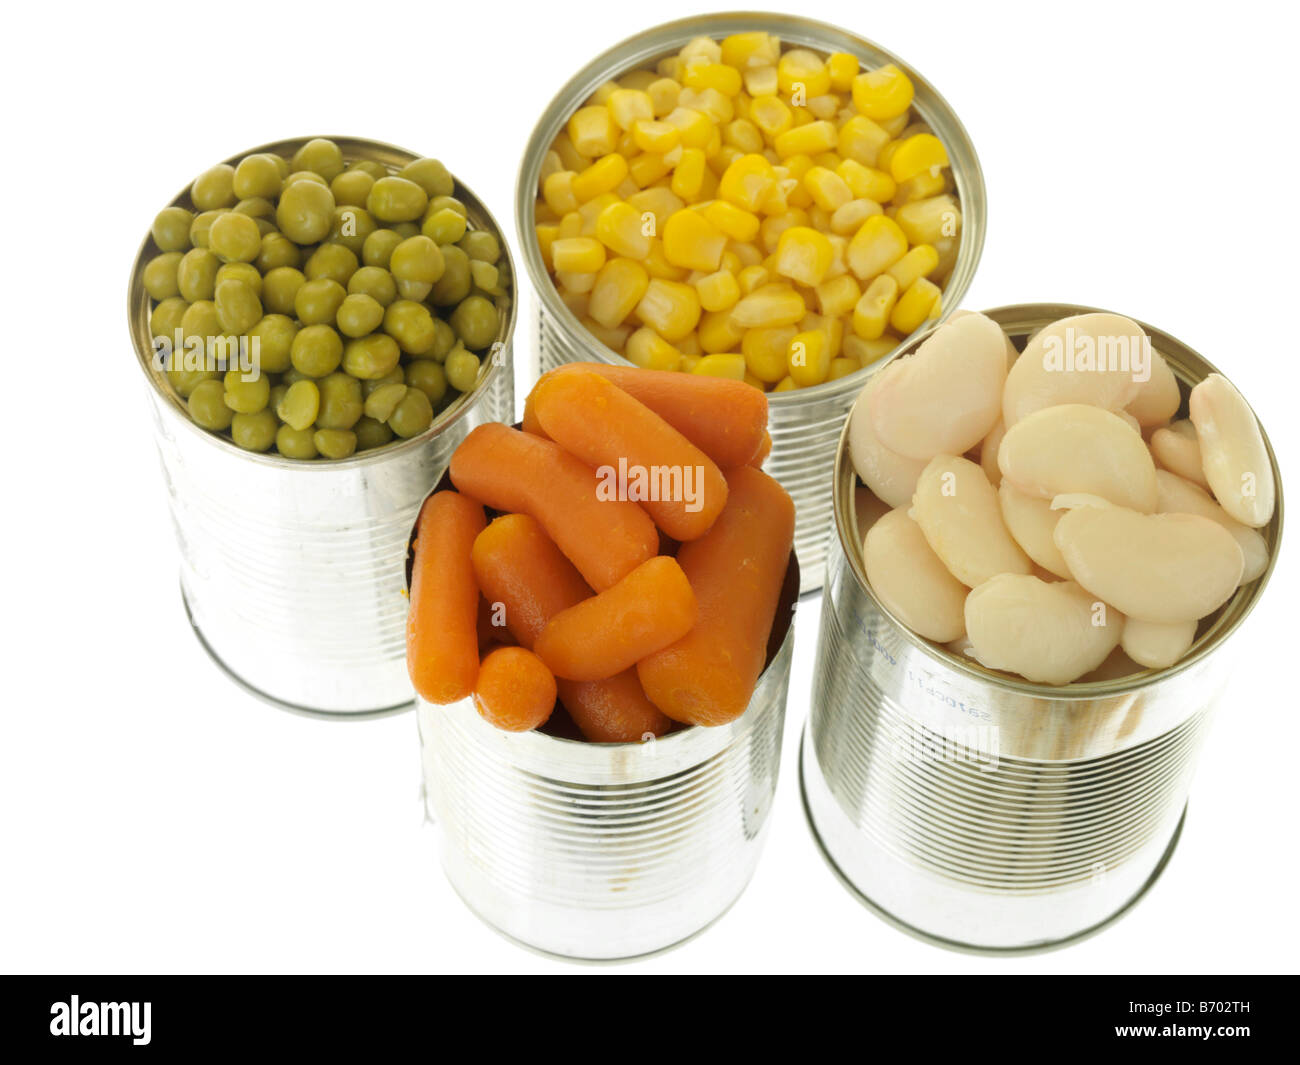 Selection of Popular And Convenient Tinned Vegetables Ready To Cook